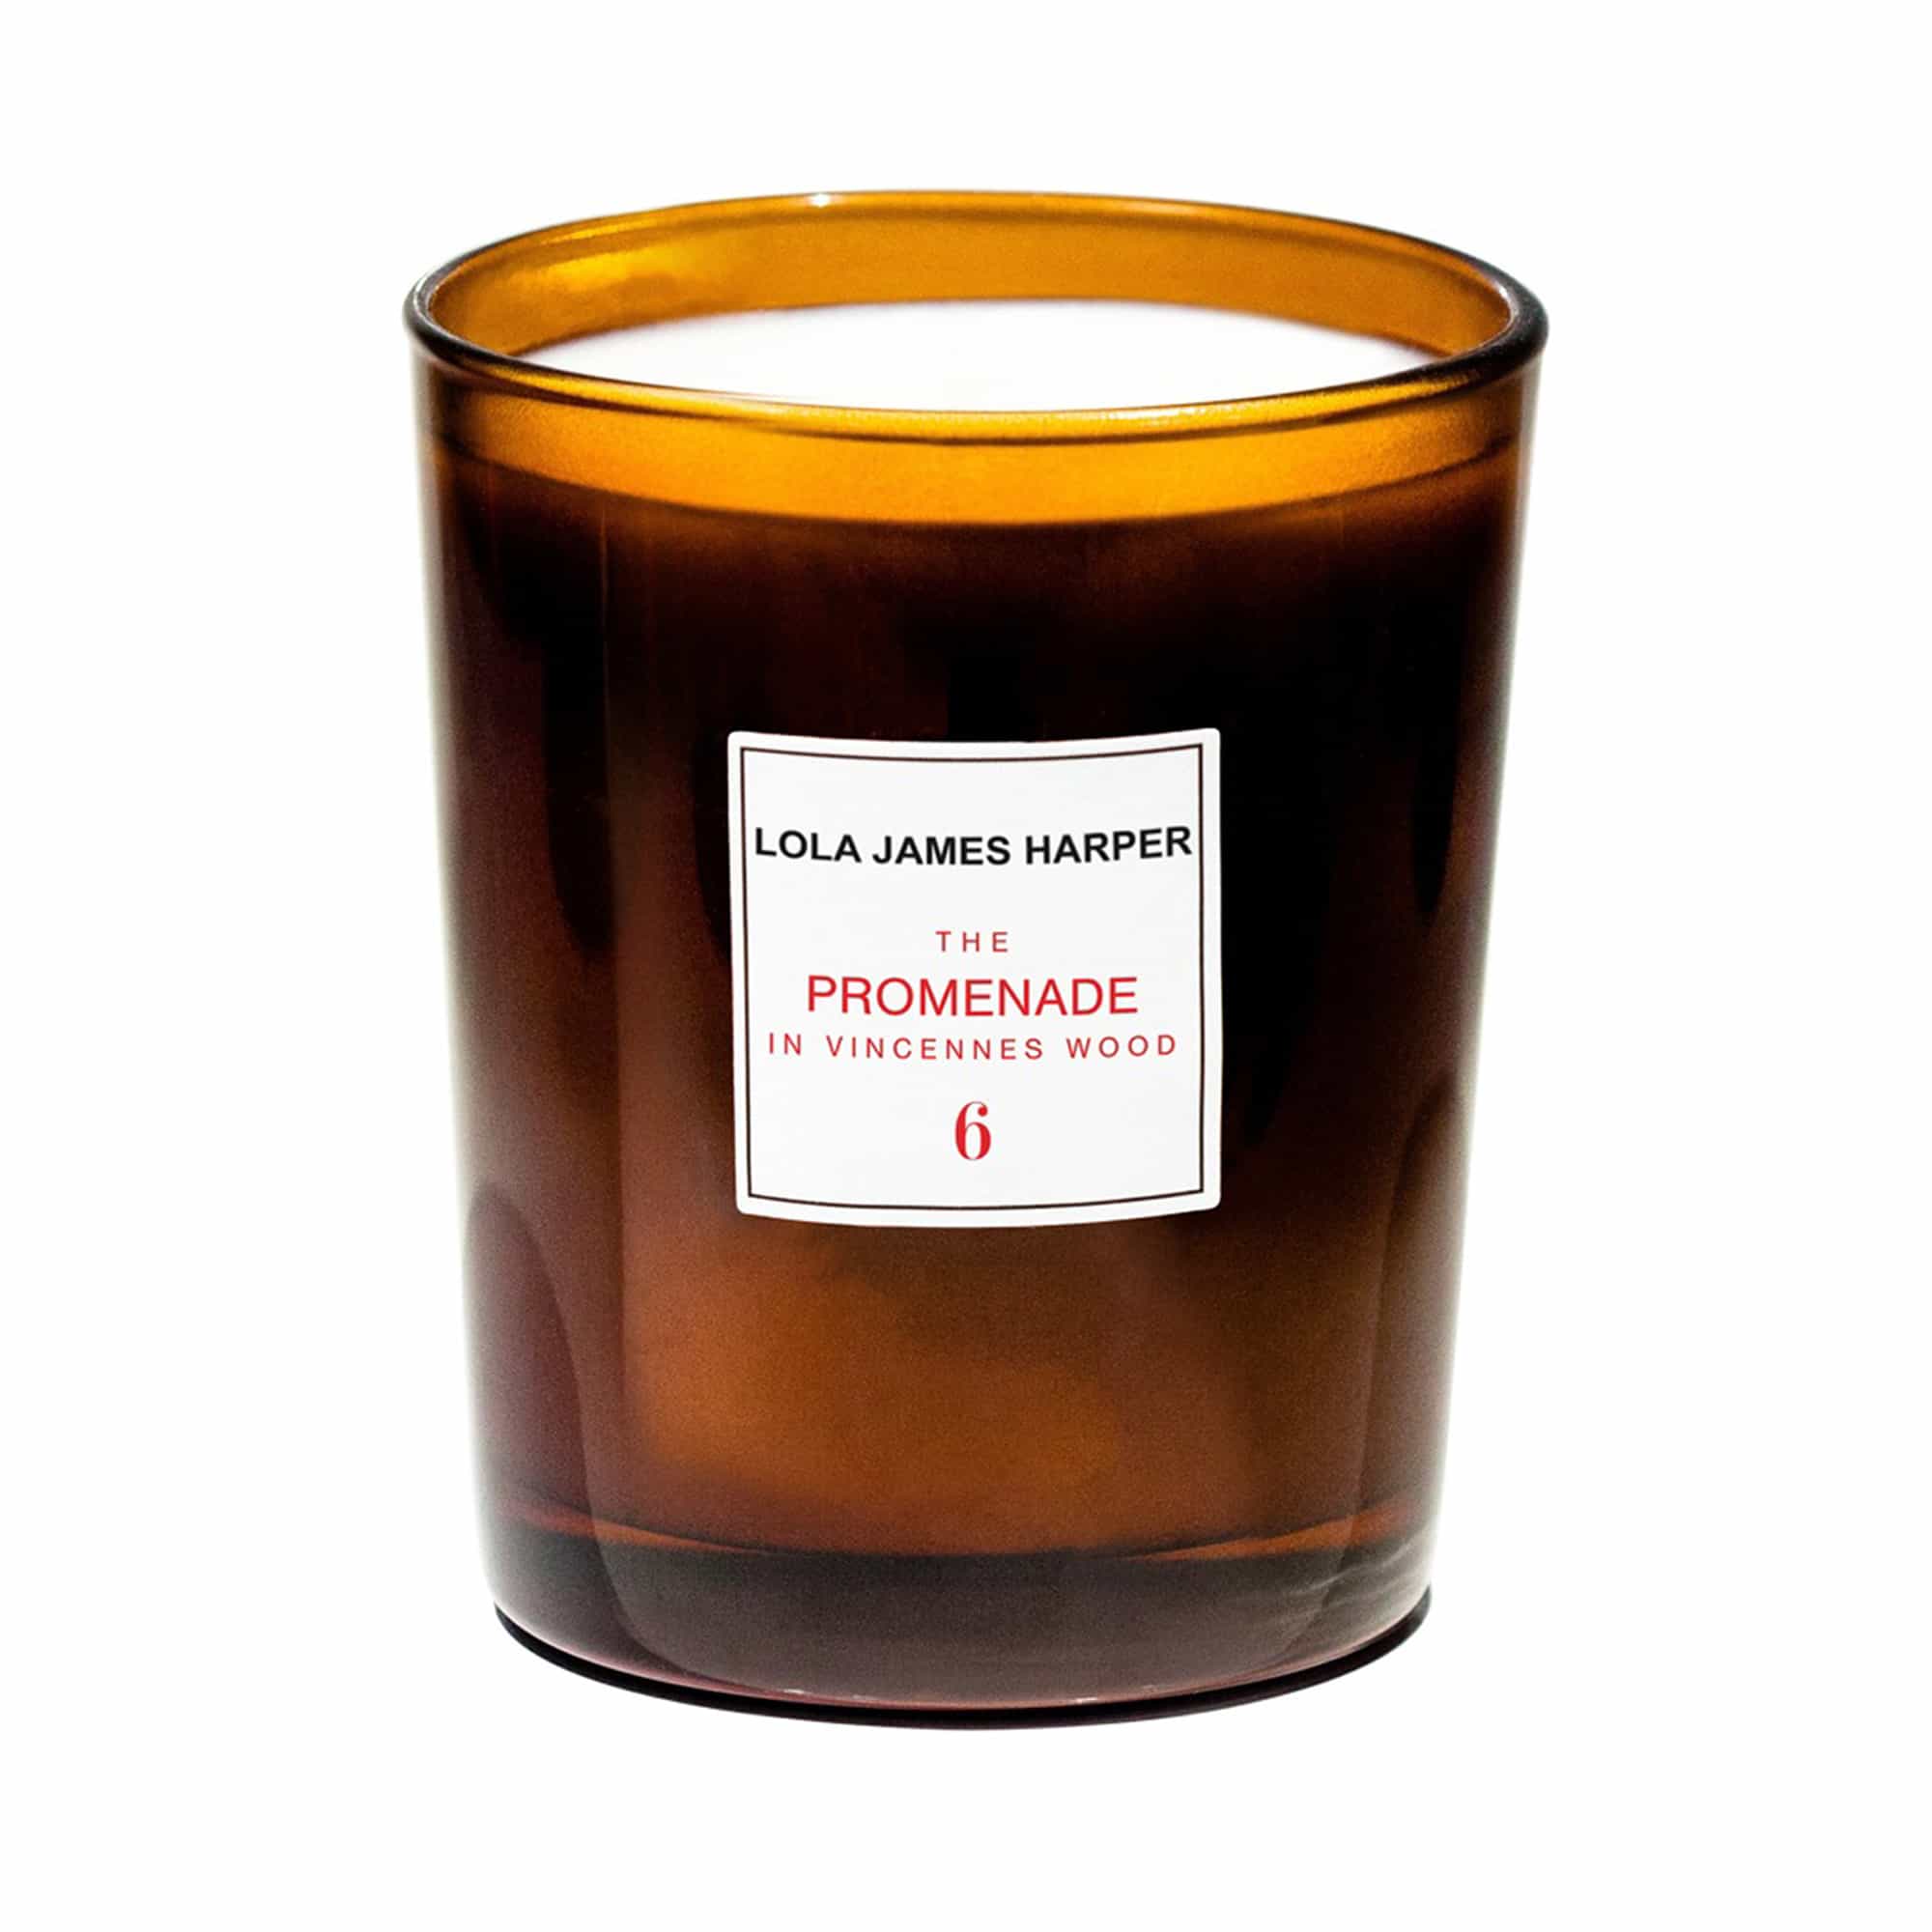 The Promenade in Vincennes Wood Candle